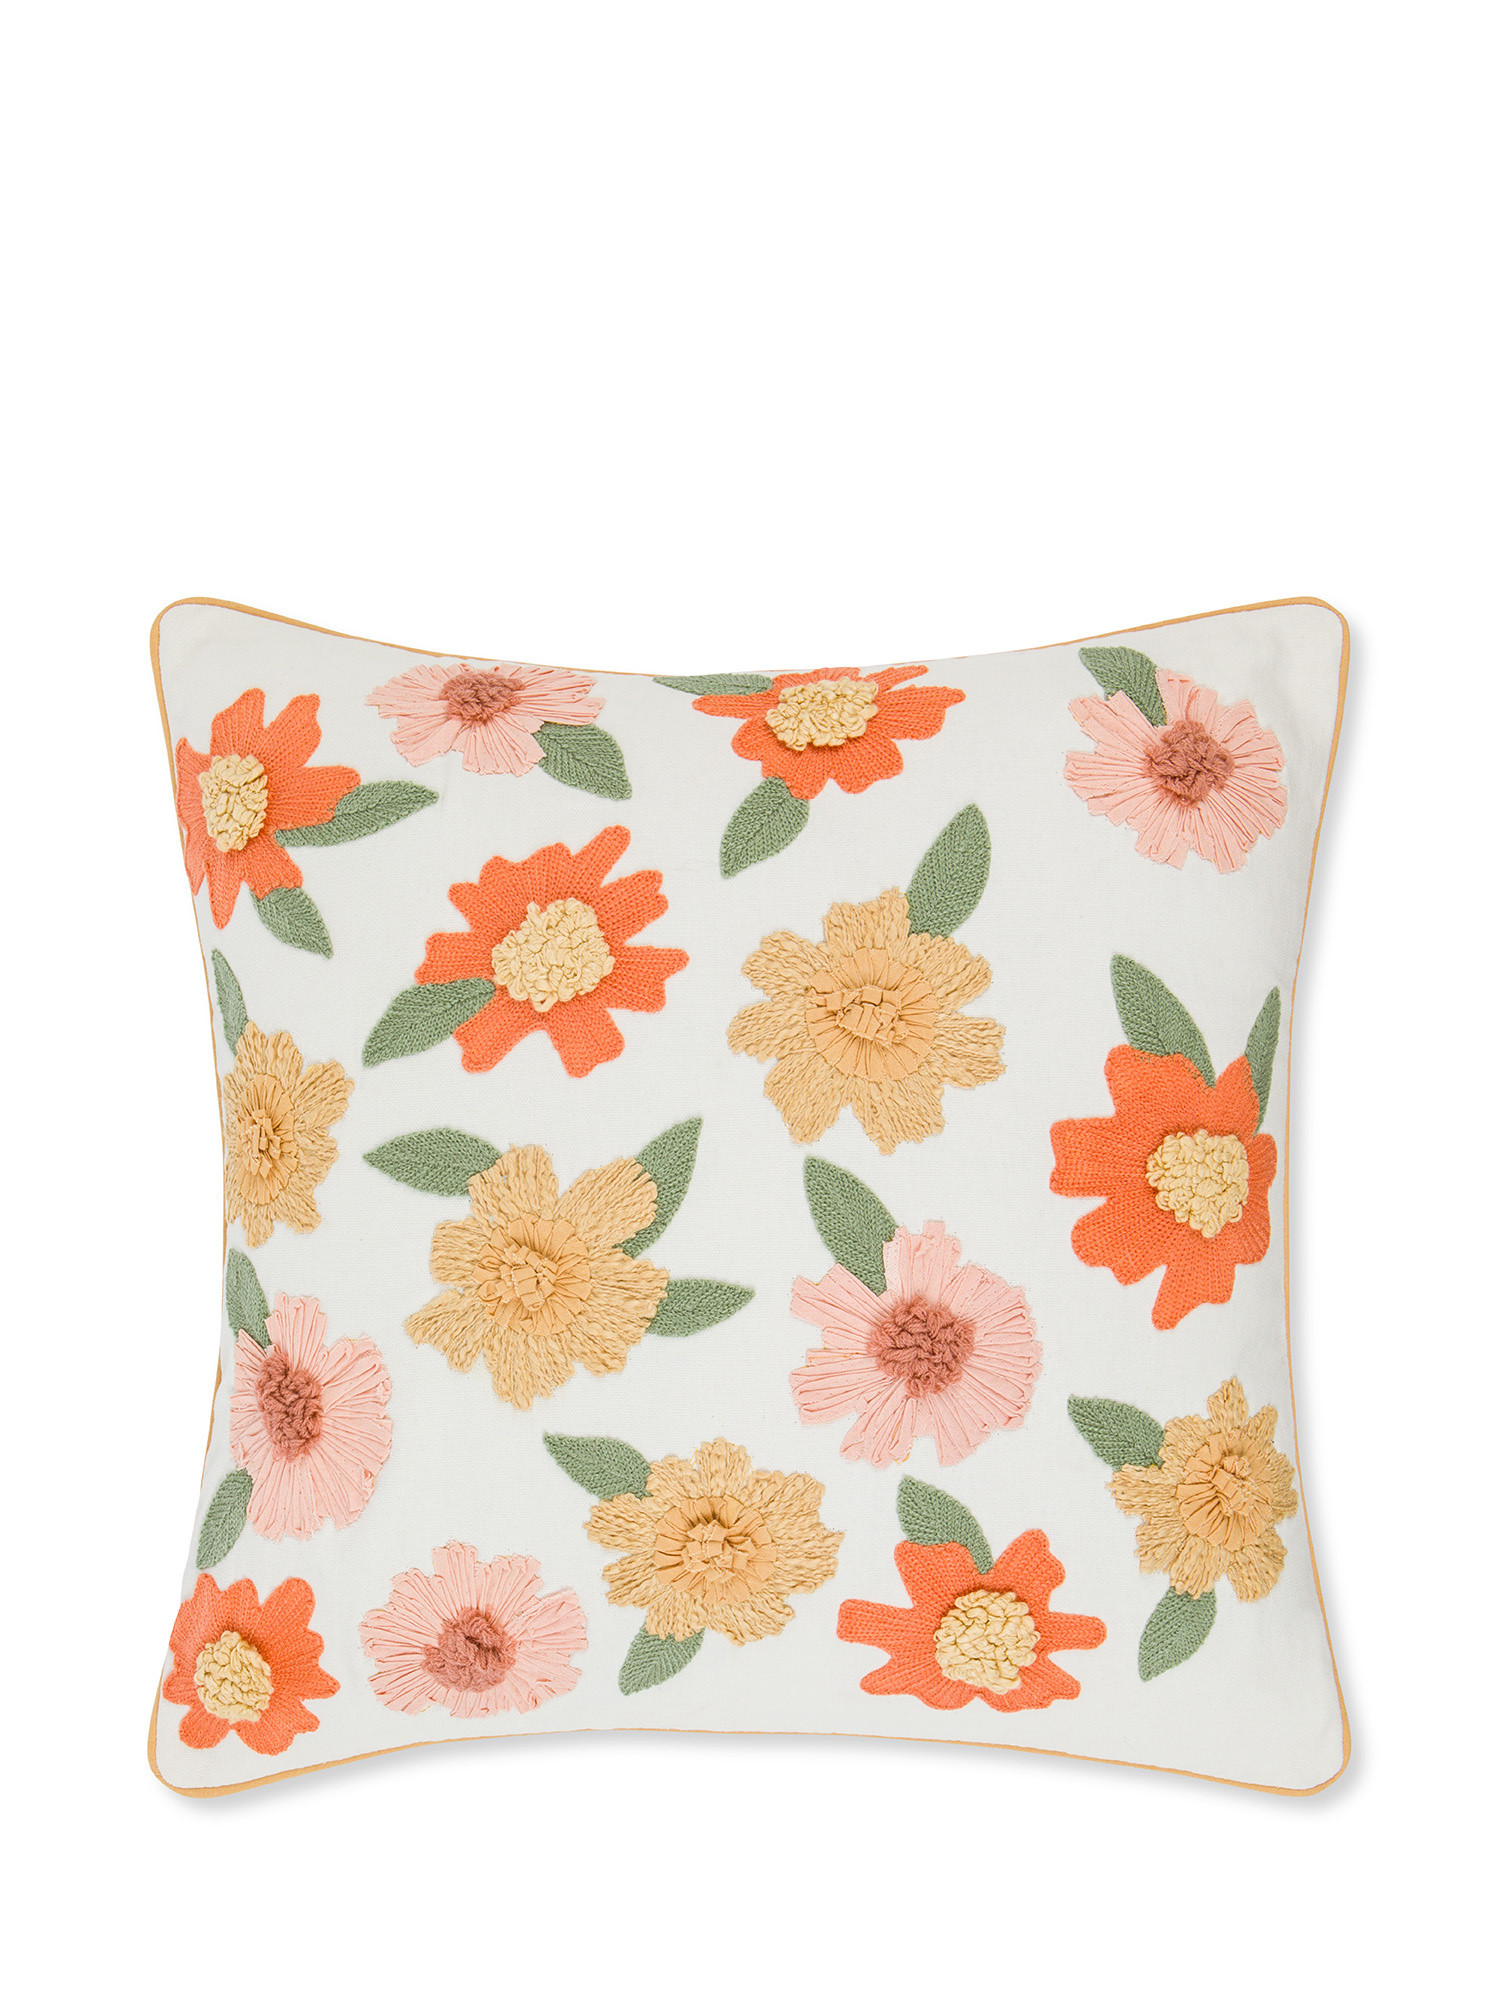 Embroidered cushion with flowers motif 45x45cm, White, large image number 0